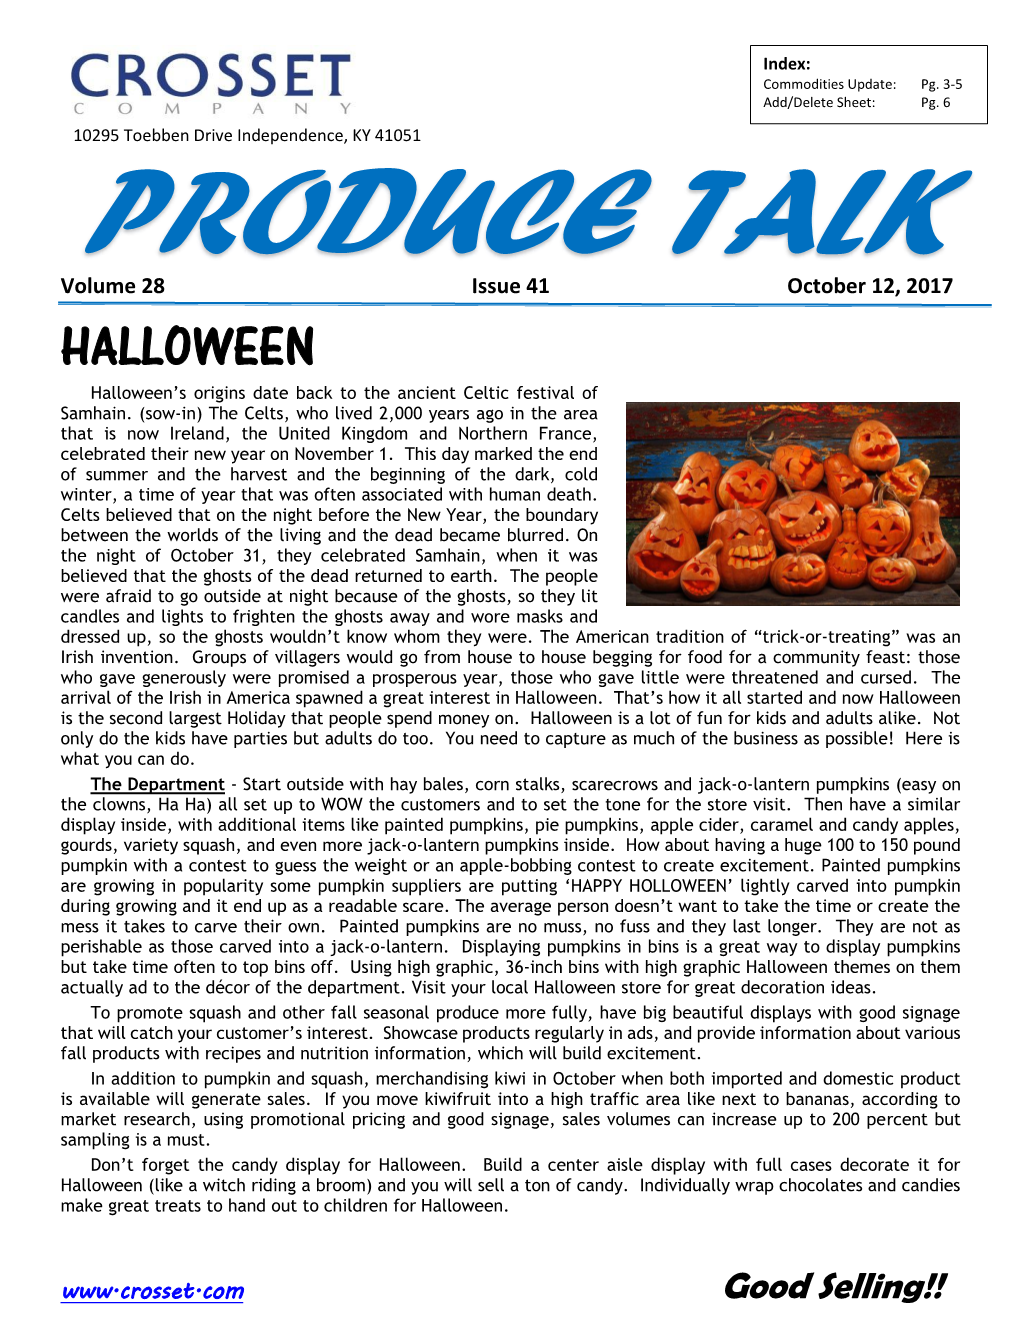 PRODUCE TALK Volume 28 Issue 41 October 12, 2017 HALLOWEEN Halloween’S Origins Date Back to the Ancient Celtic Festival of Samhain